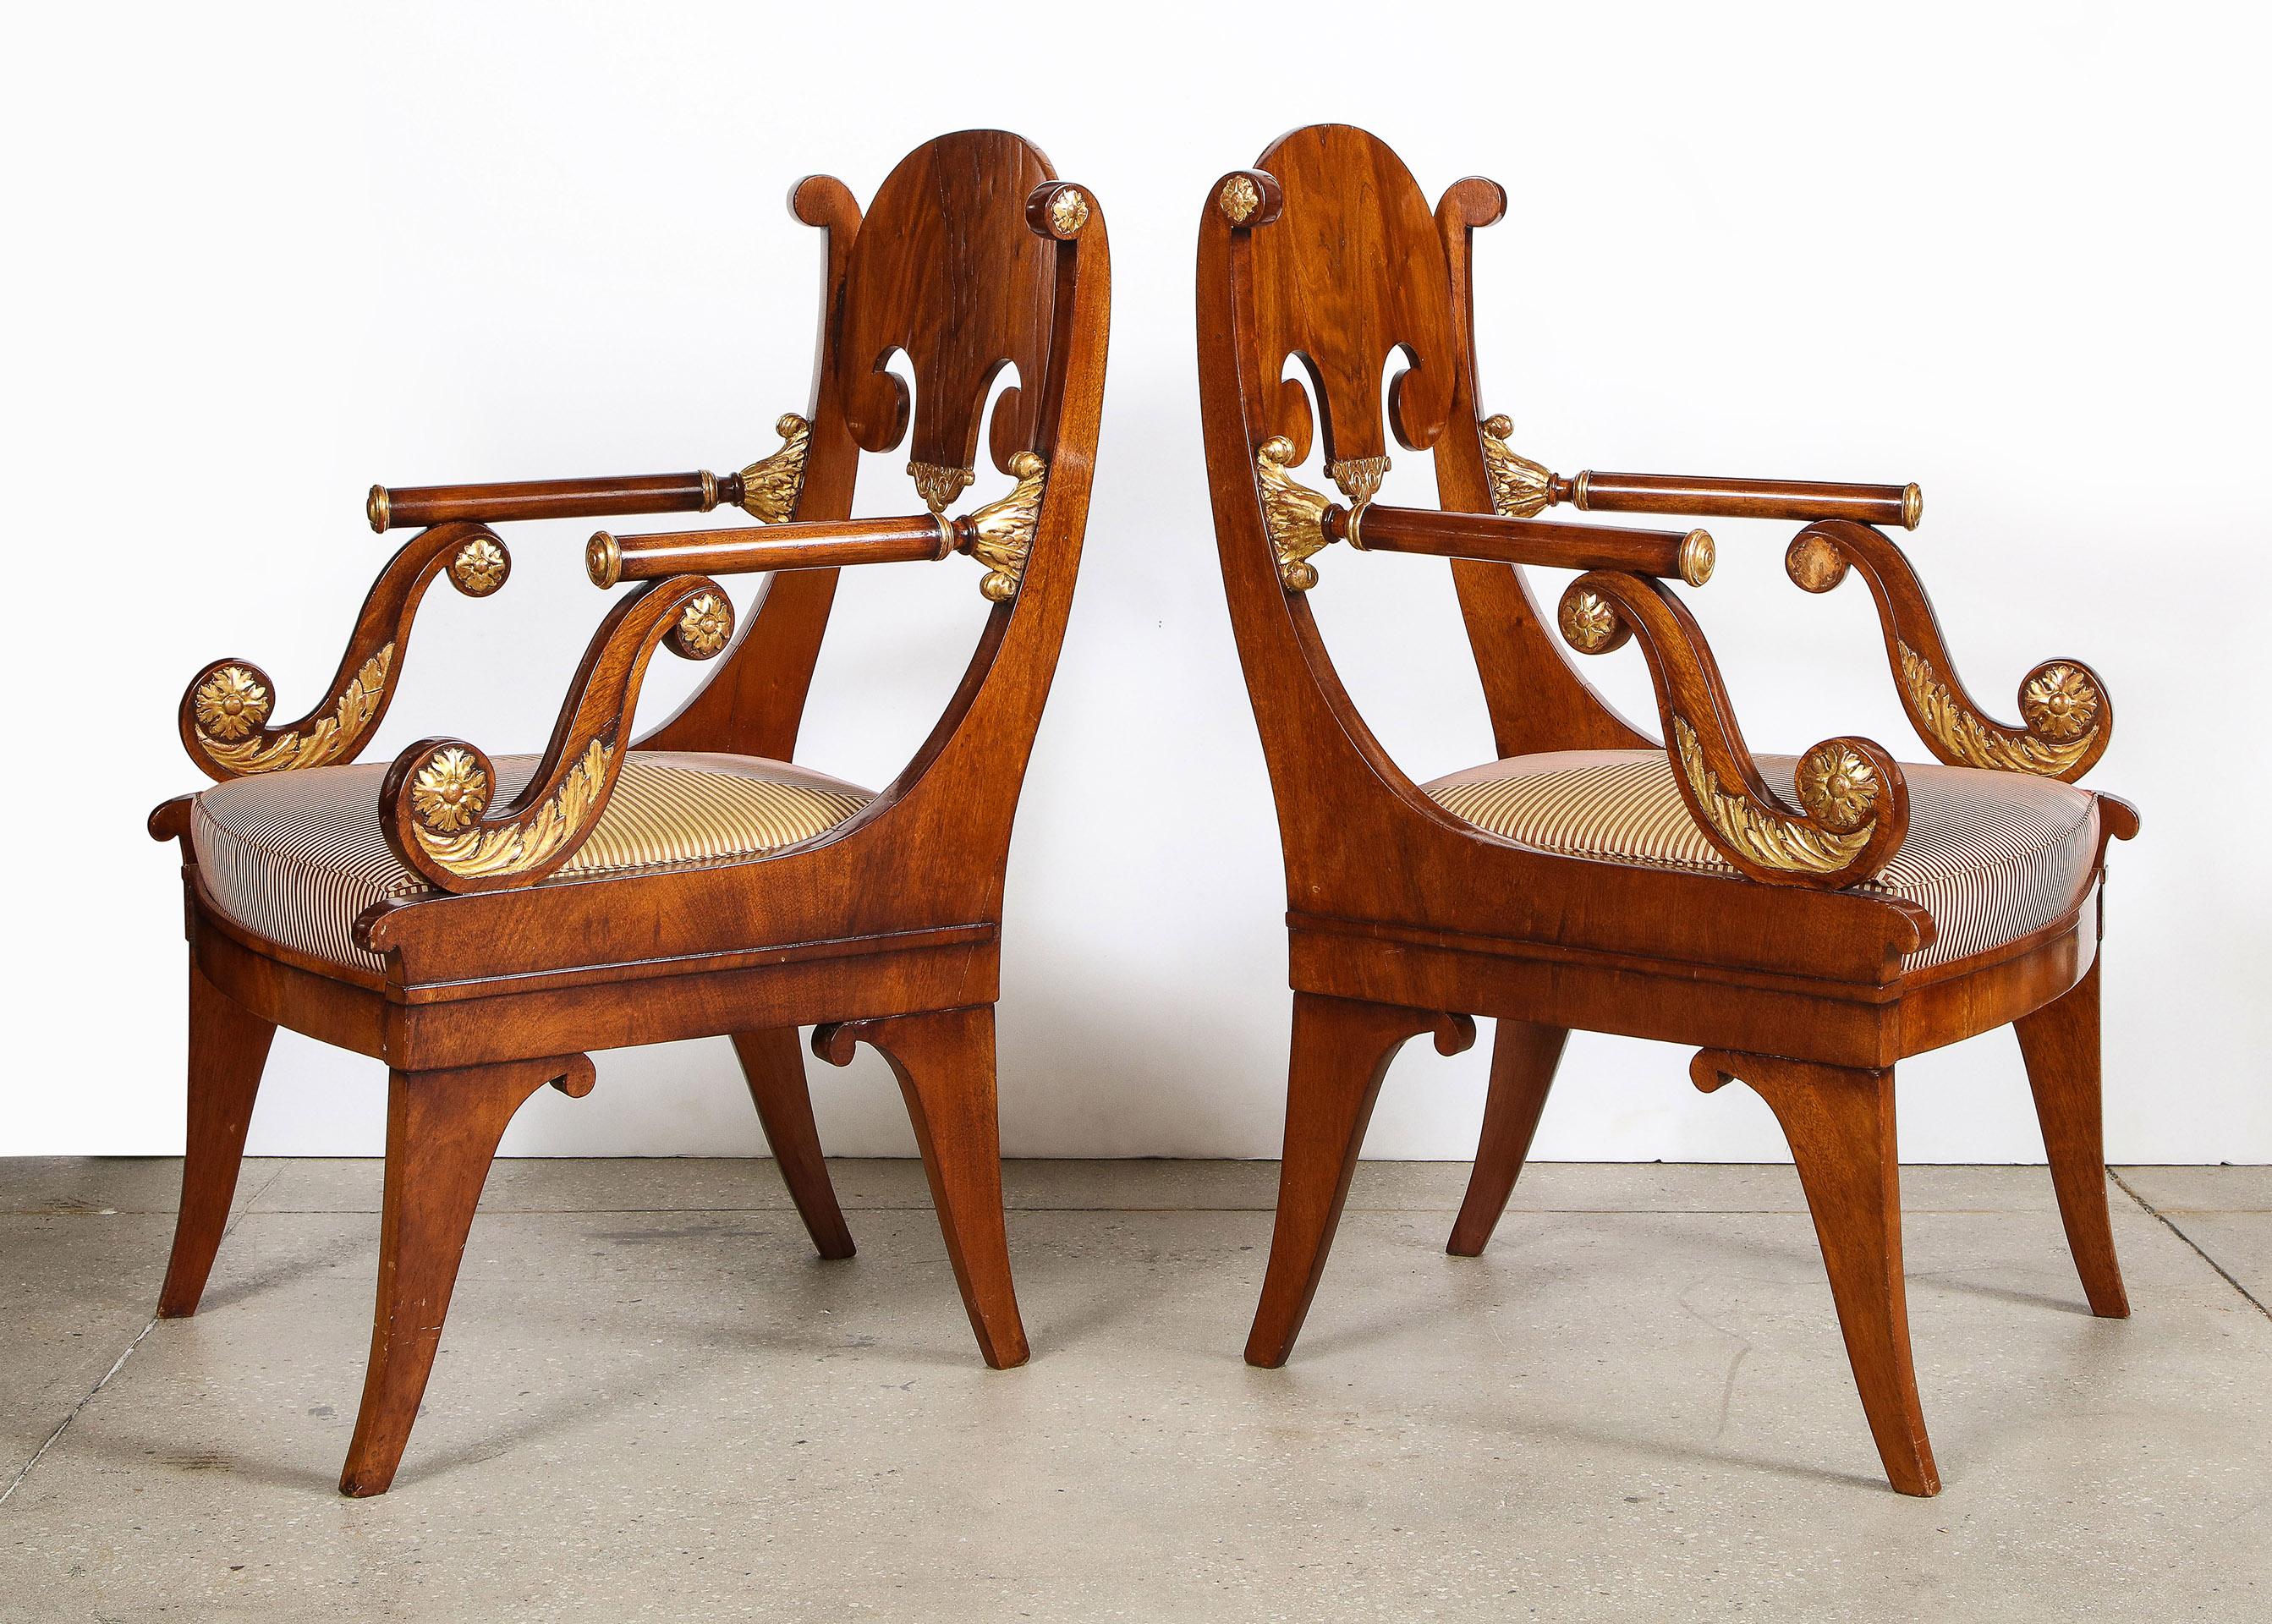 Pair of Russian neoclassical parcel-gilt mahogany armchairs

Each armchair made during the Empire period in Russia. The mahogany veneered frame with gilded details. With unusual tubular mahogany arms on 